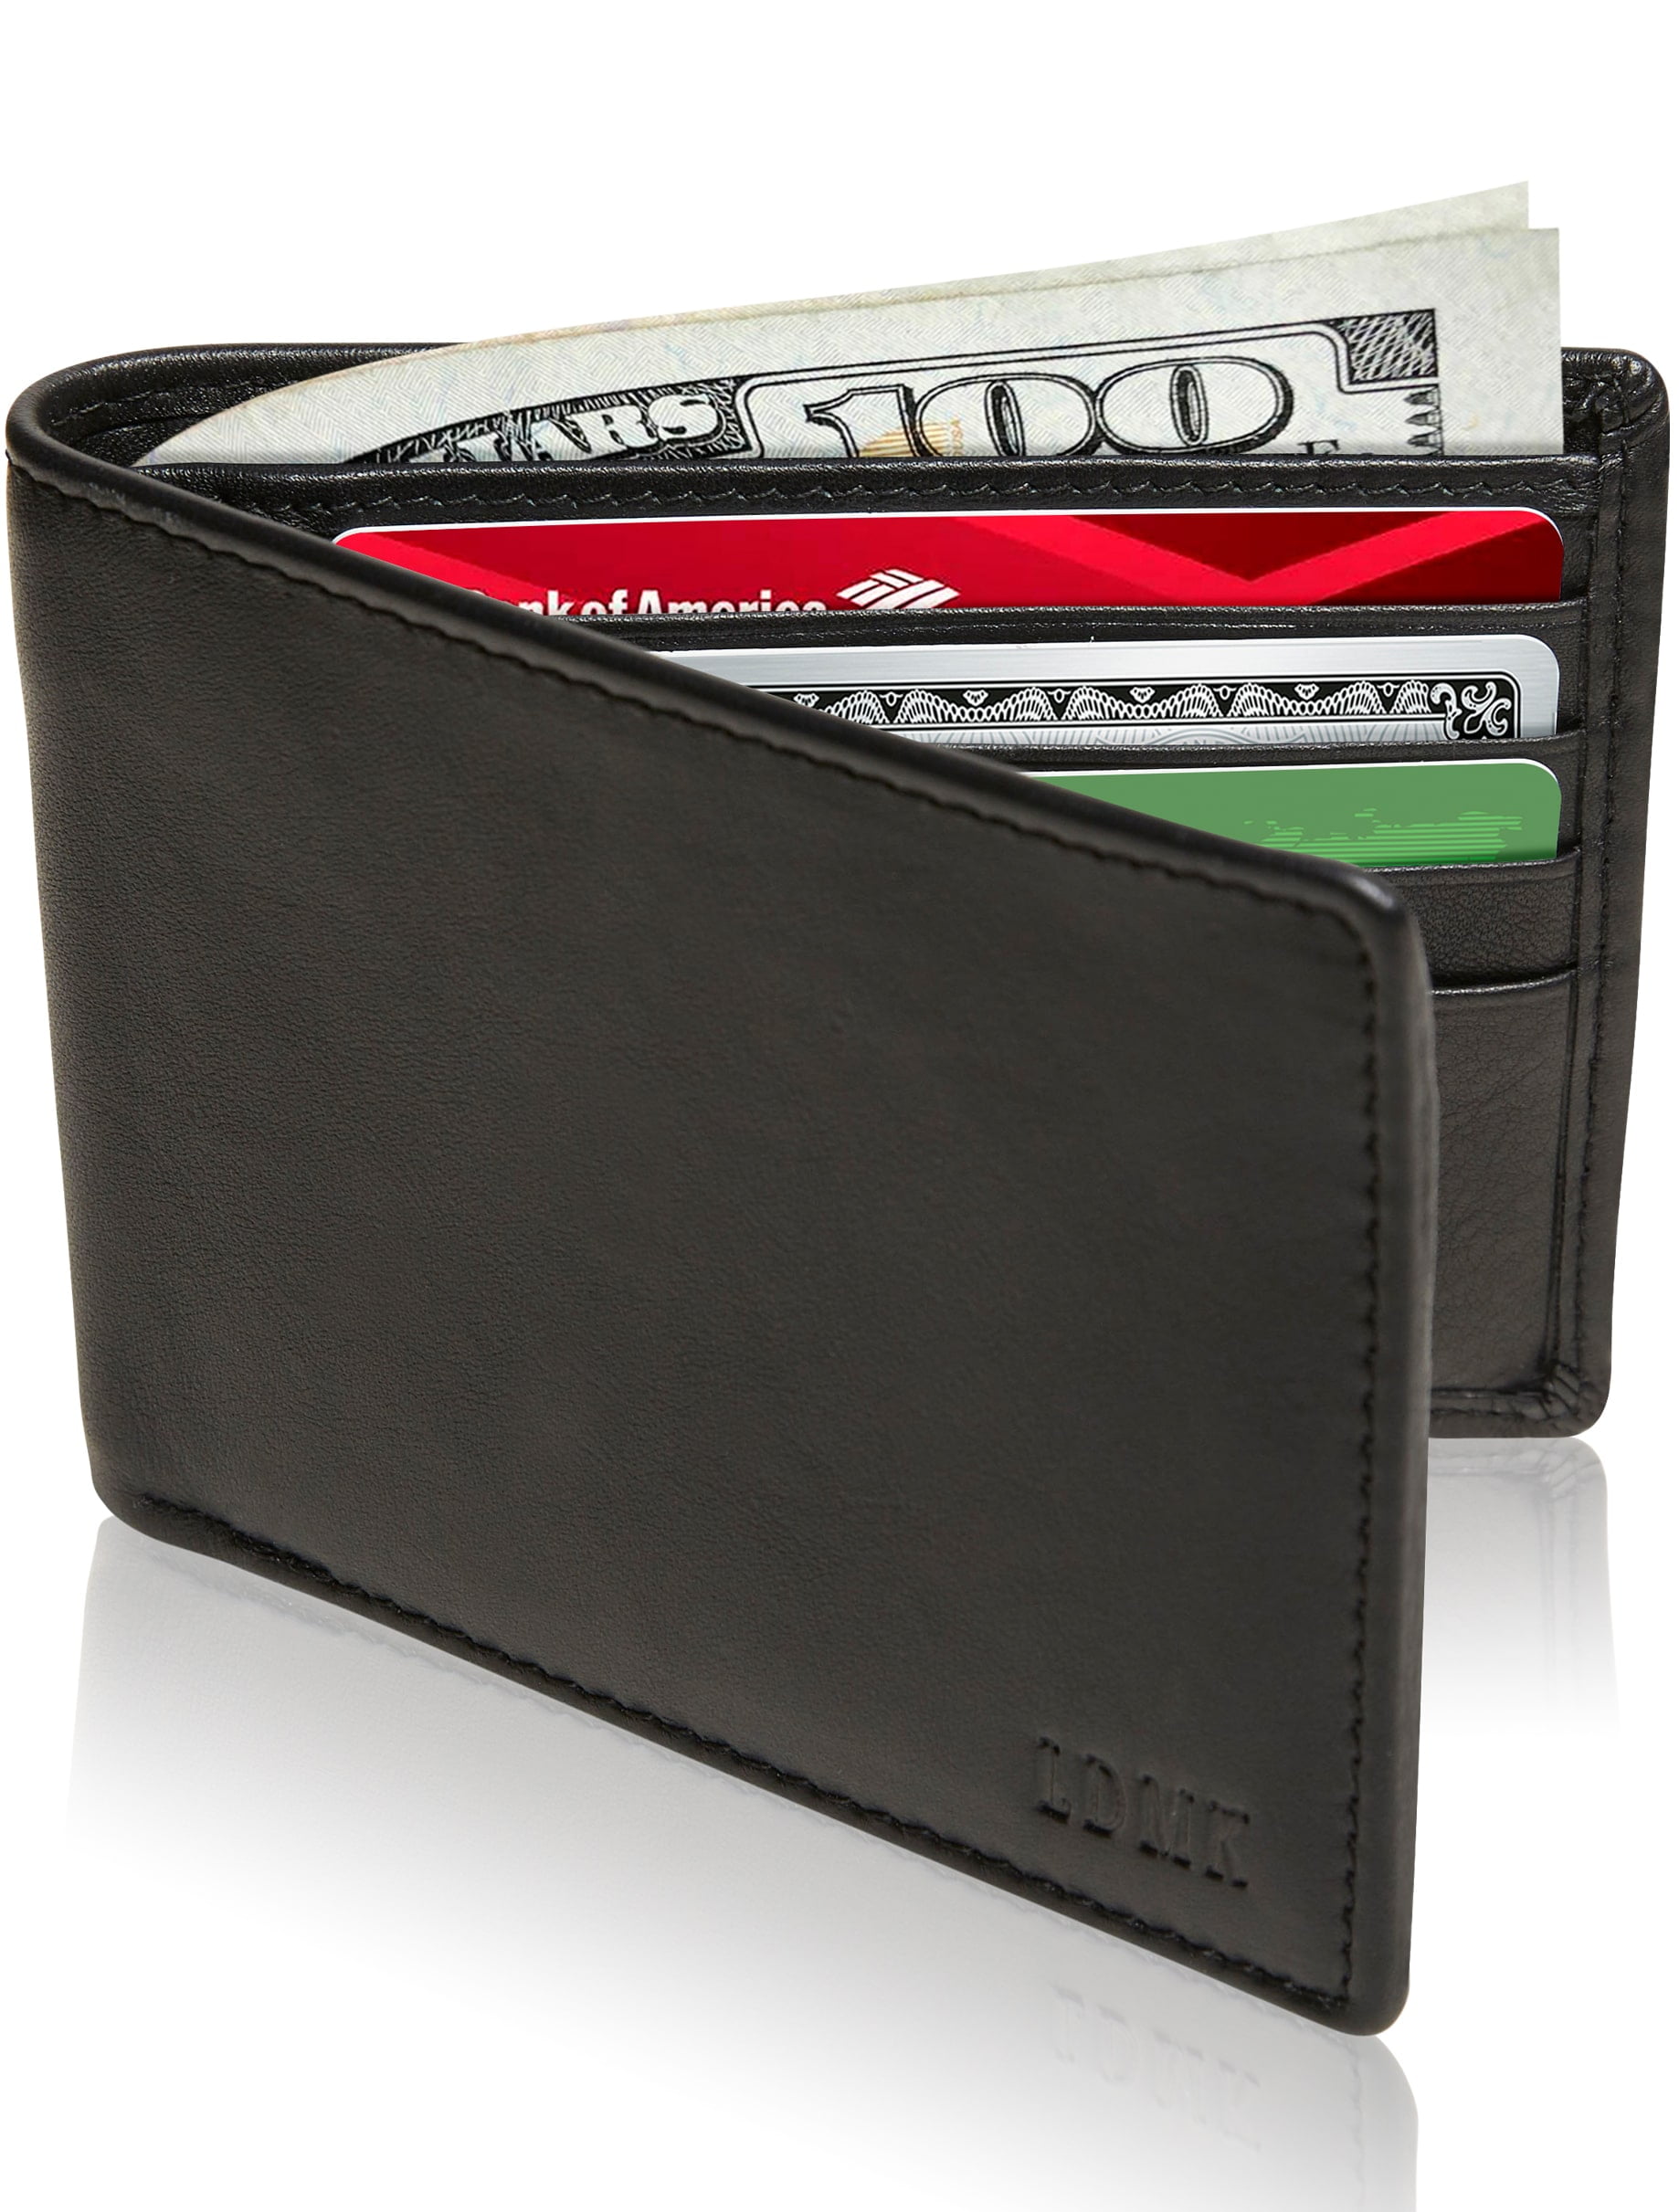 Mens Wallets RFID Blocking Slim Bifold Genuine Leather as Gift for Father Brother Husband Black